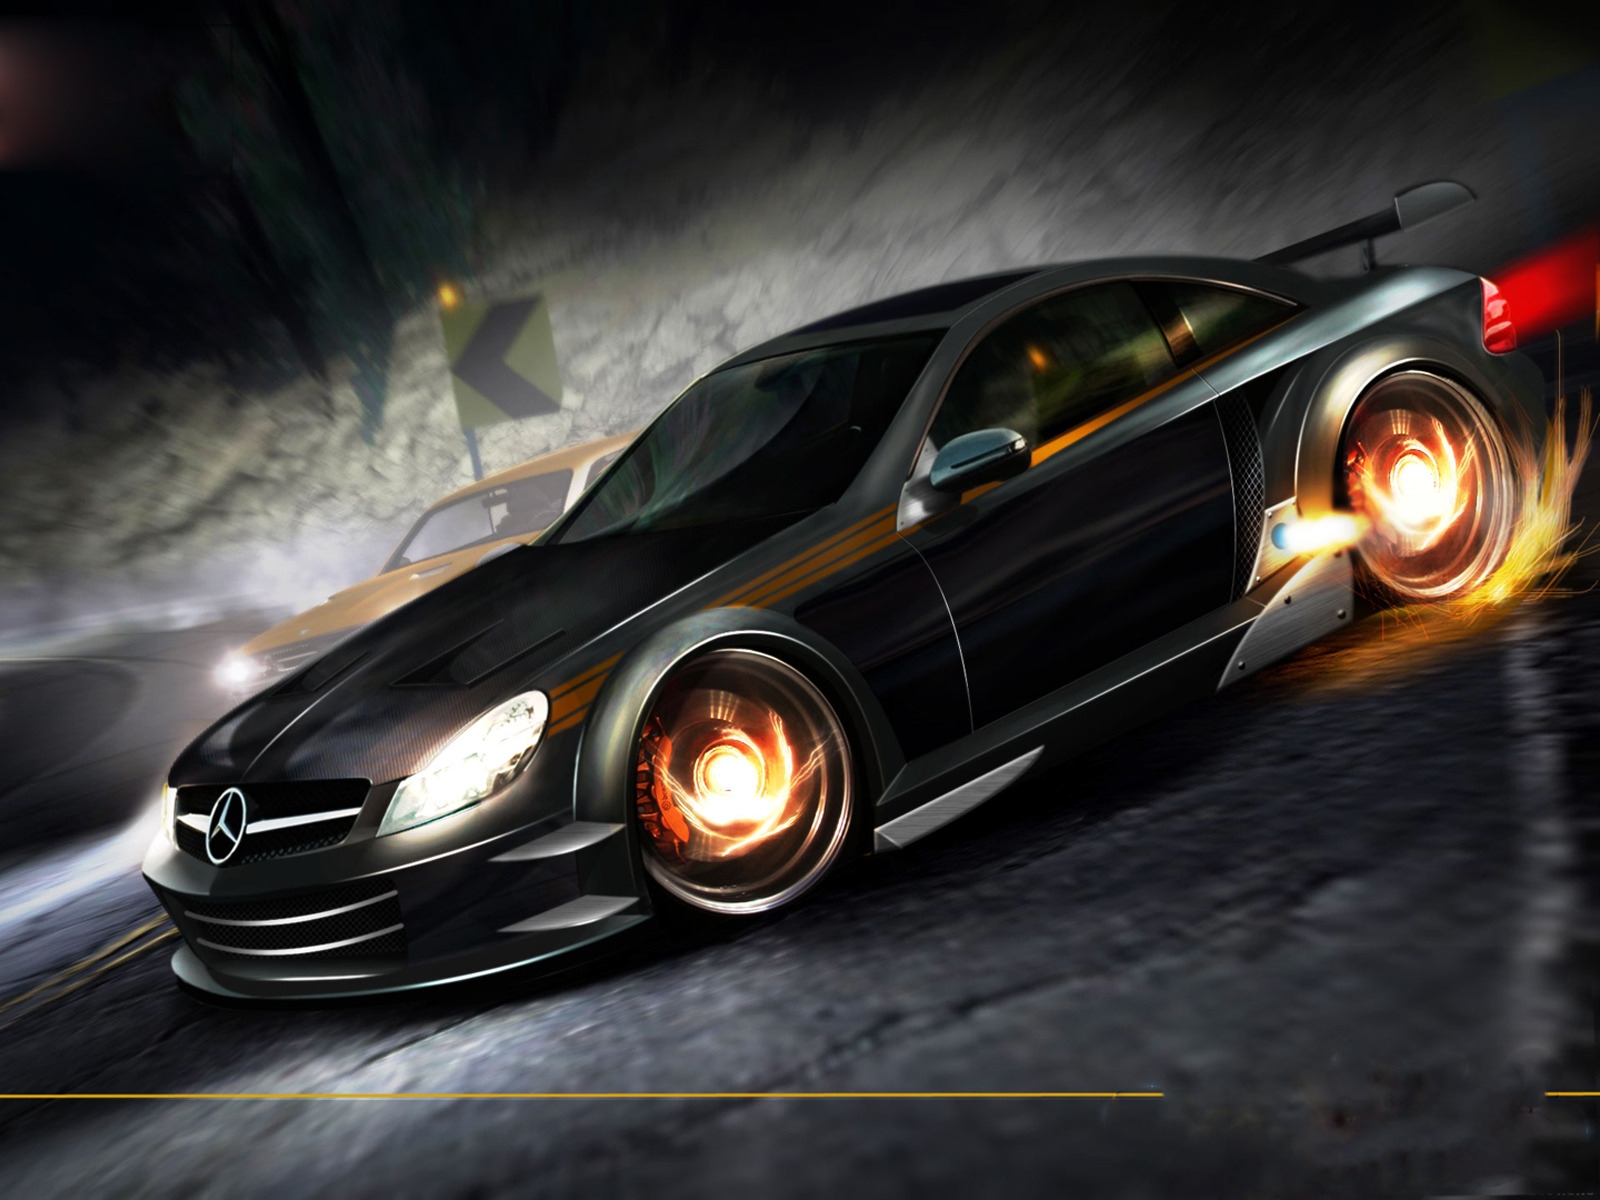 NFS Carbon Mercedes for 1600 x 1200 resolution